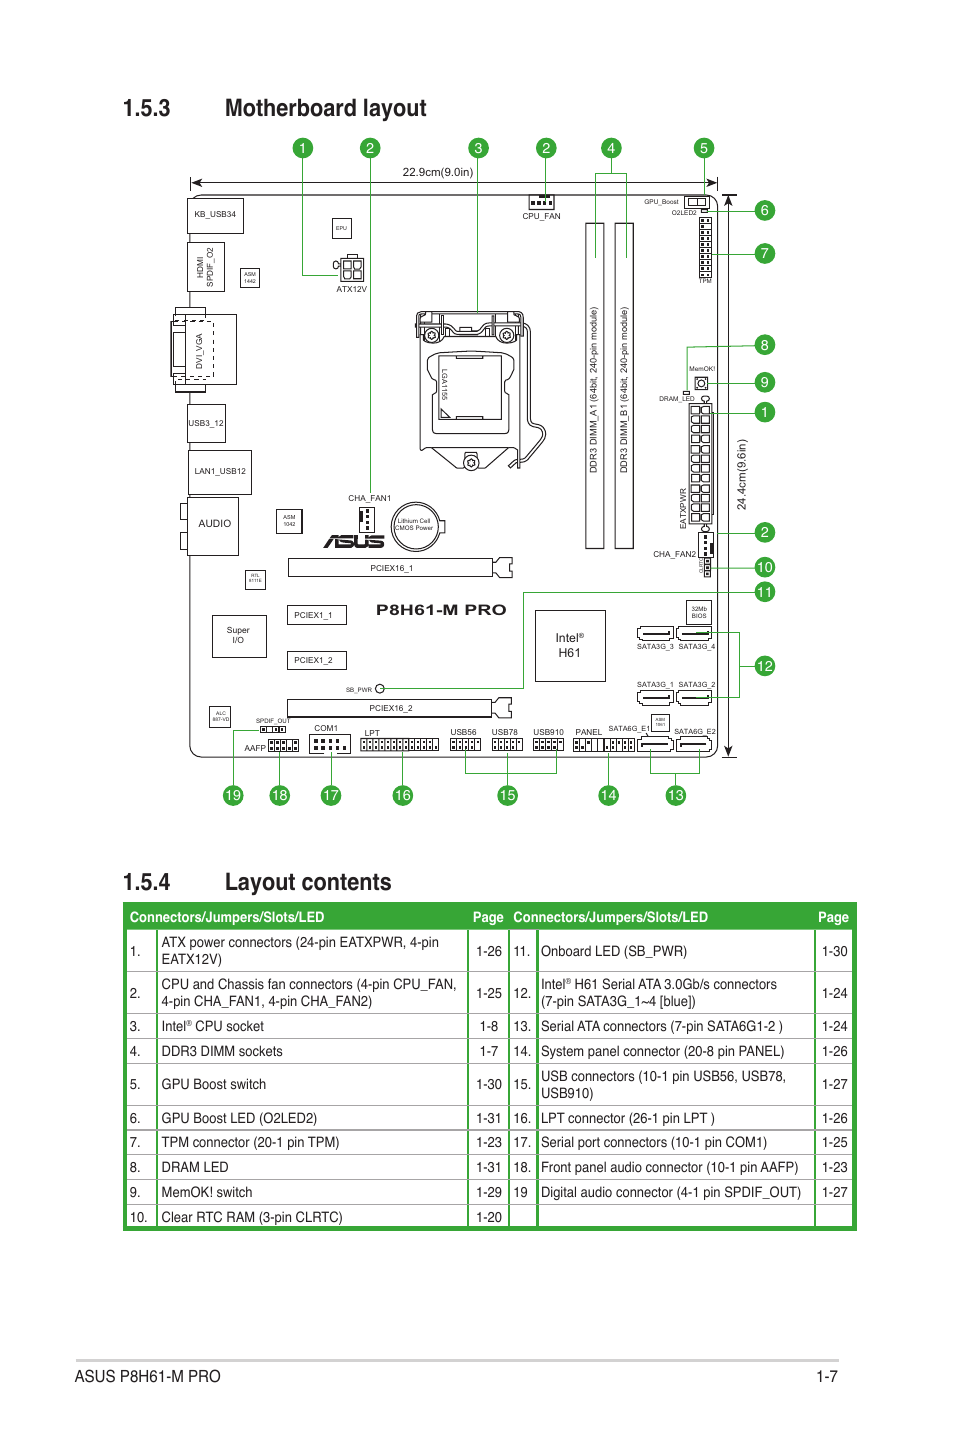 3 motherboard layout, 4 layout contents, Motherboard layout -7 | Asus P8H61-M  PRO User Manual | Page 19 / 76 | Original mode